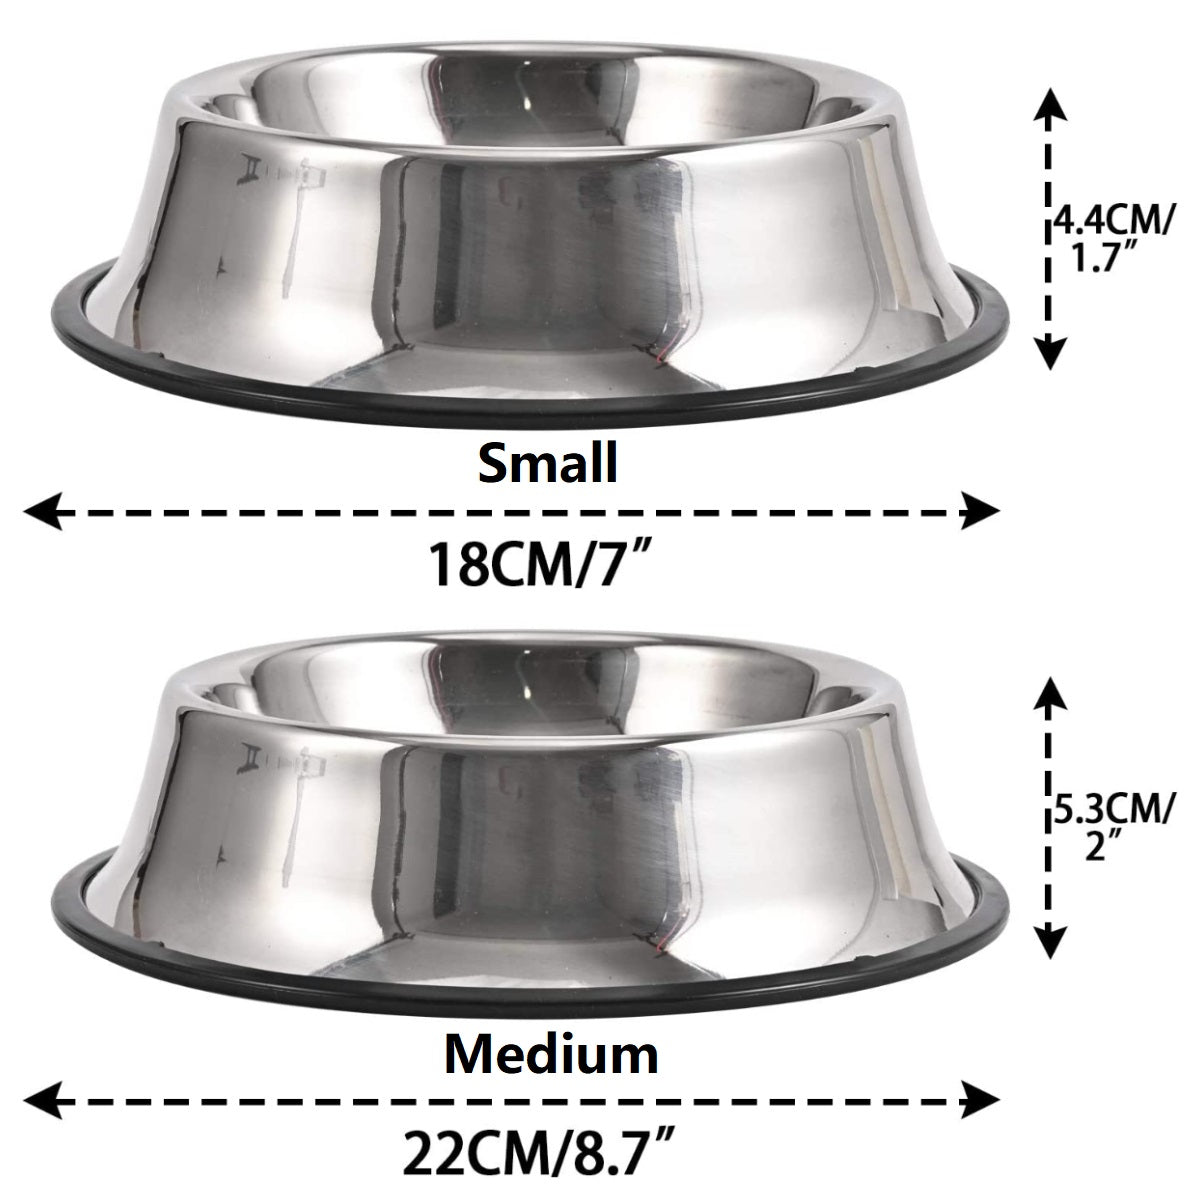 2Packs Stainless Steel Dog Bowl with Anti-Skid Rubber Base for Dog Puppy Cat and Kitten